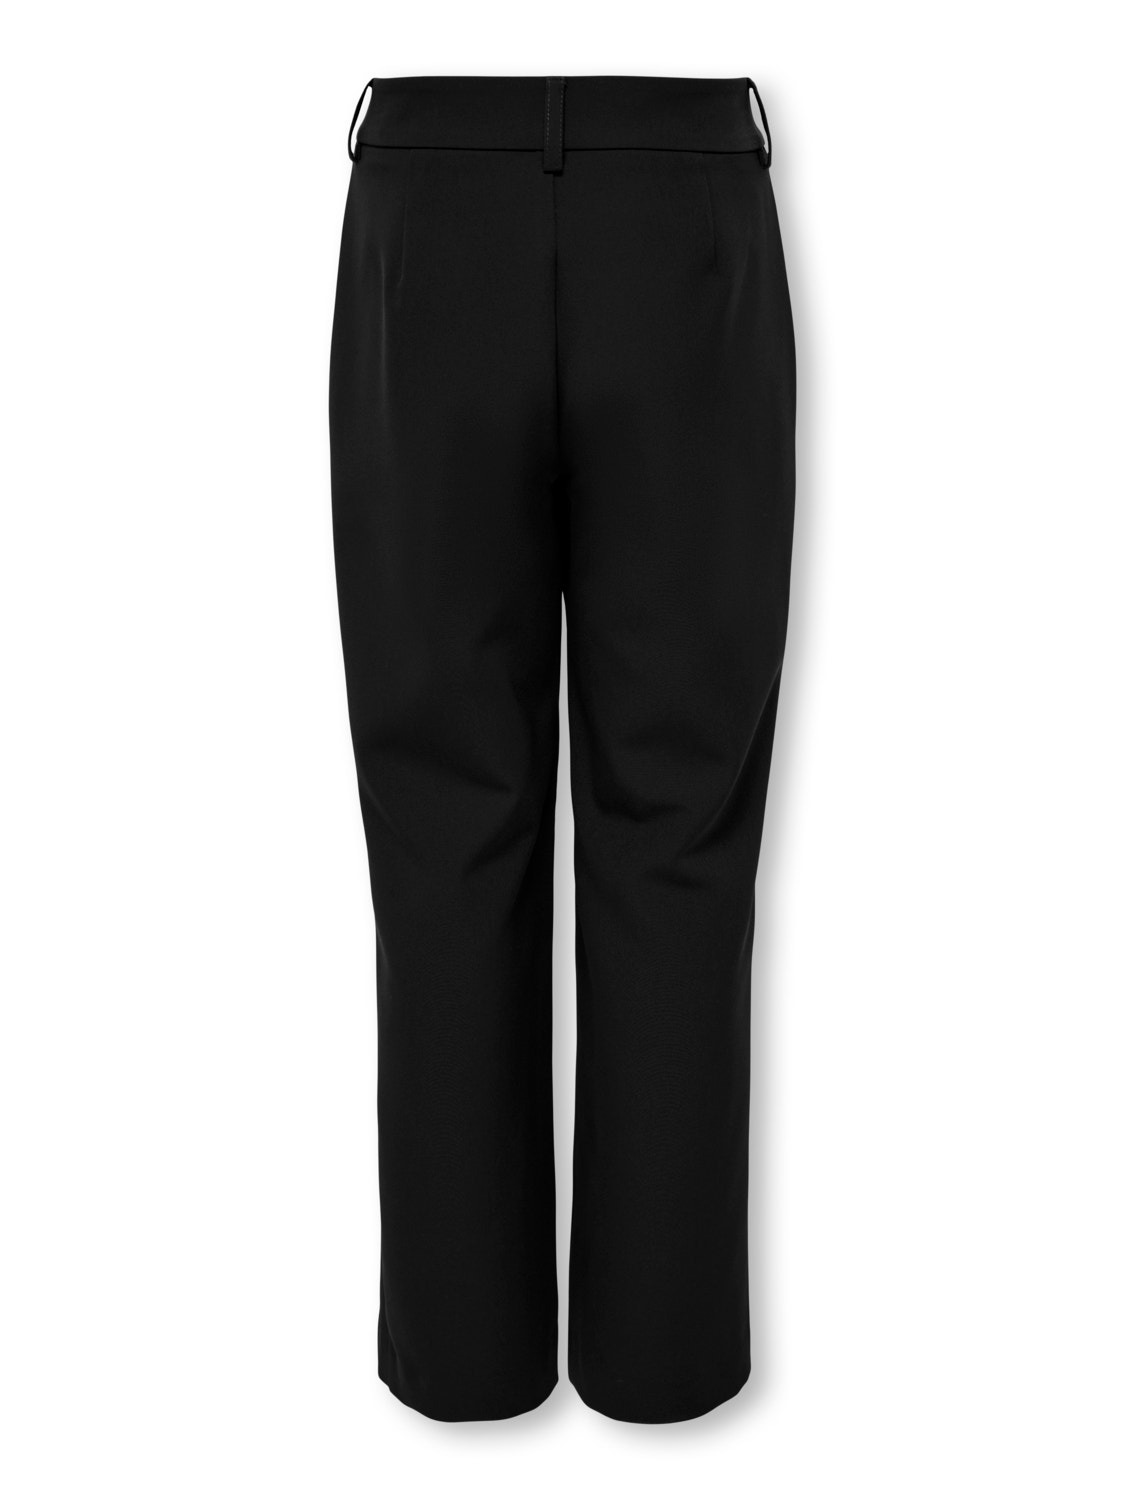 ONLY Straight Fit Mid waist Trousers -Black - 15300093